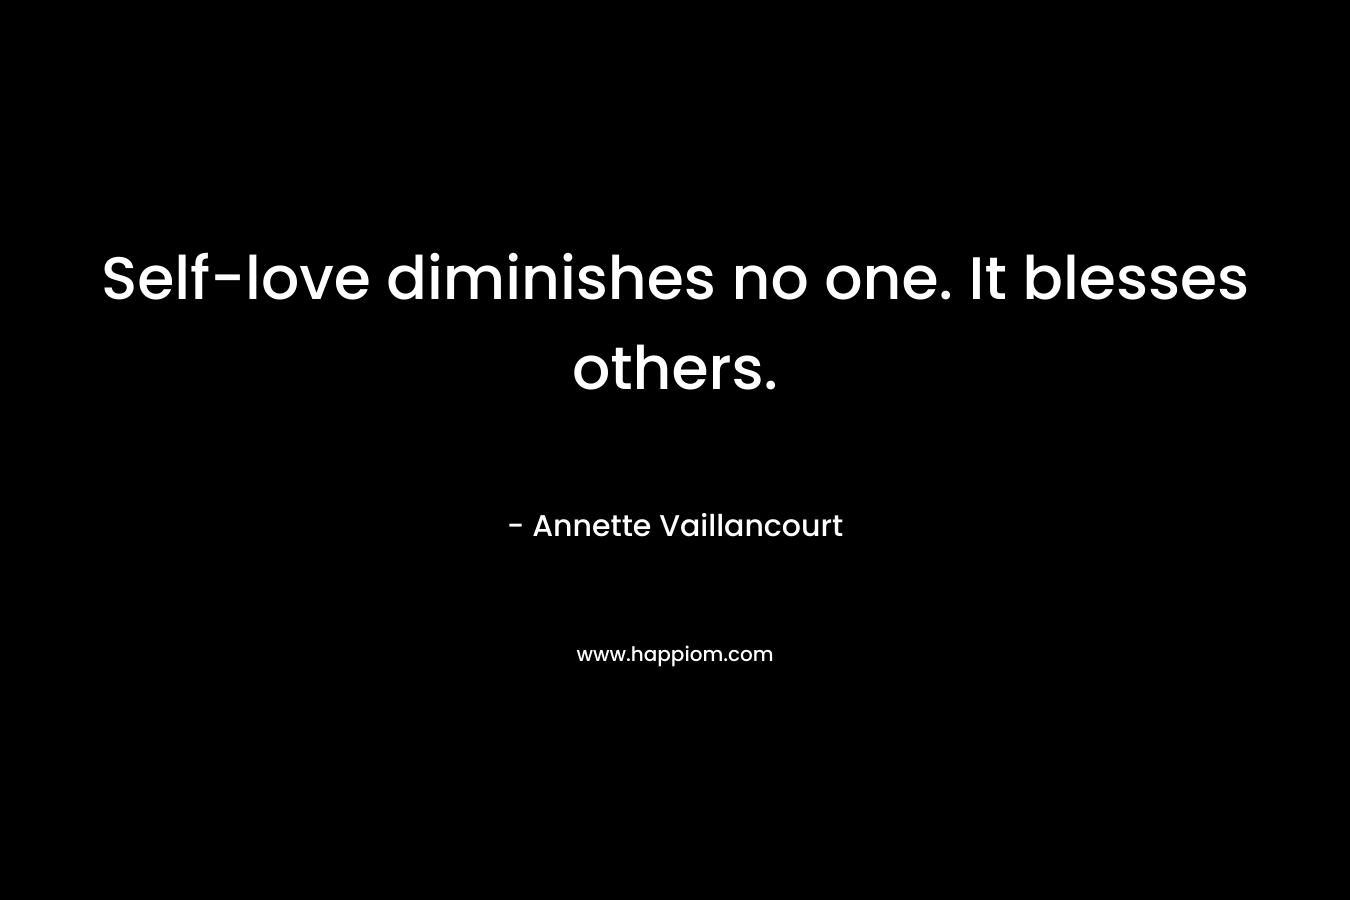 Self-love diminishes no one. It blesses others.